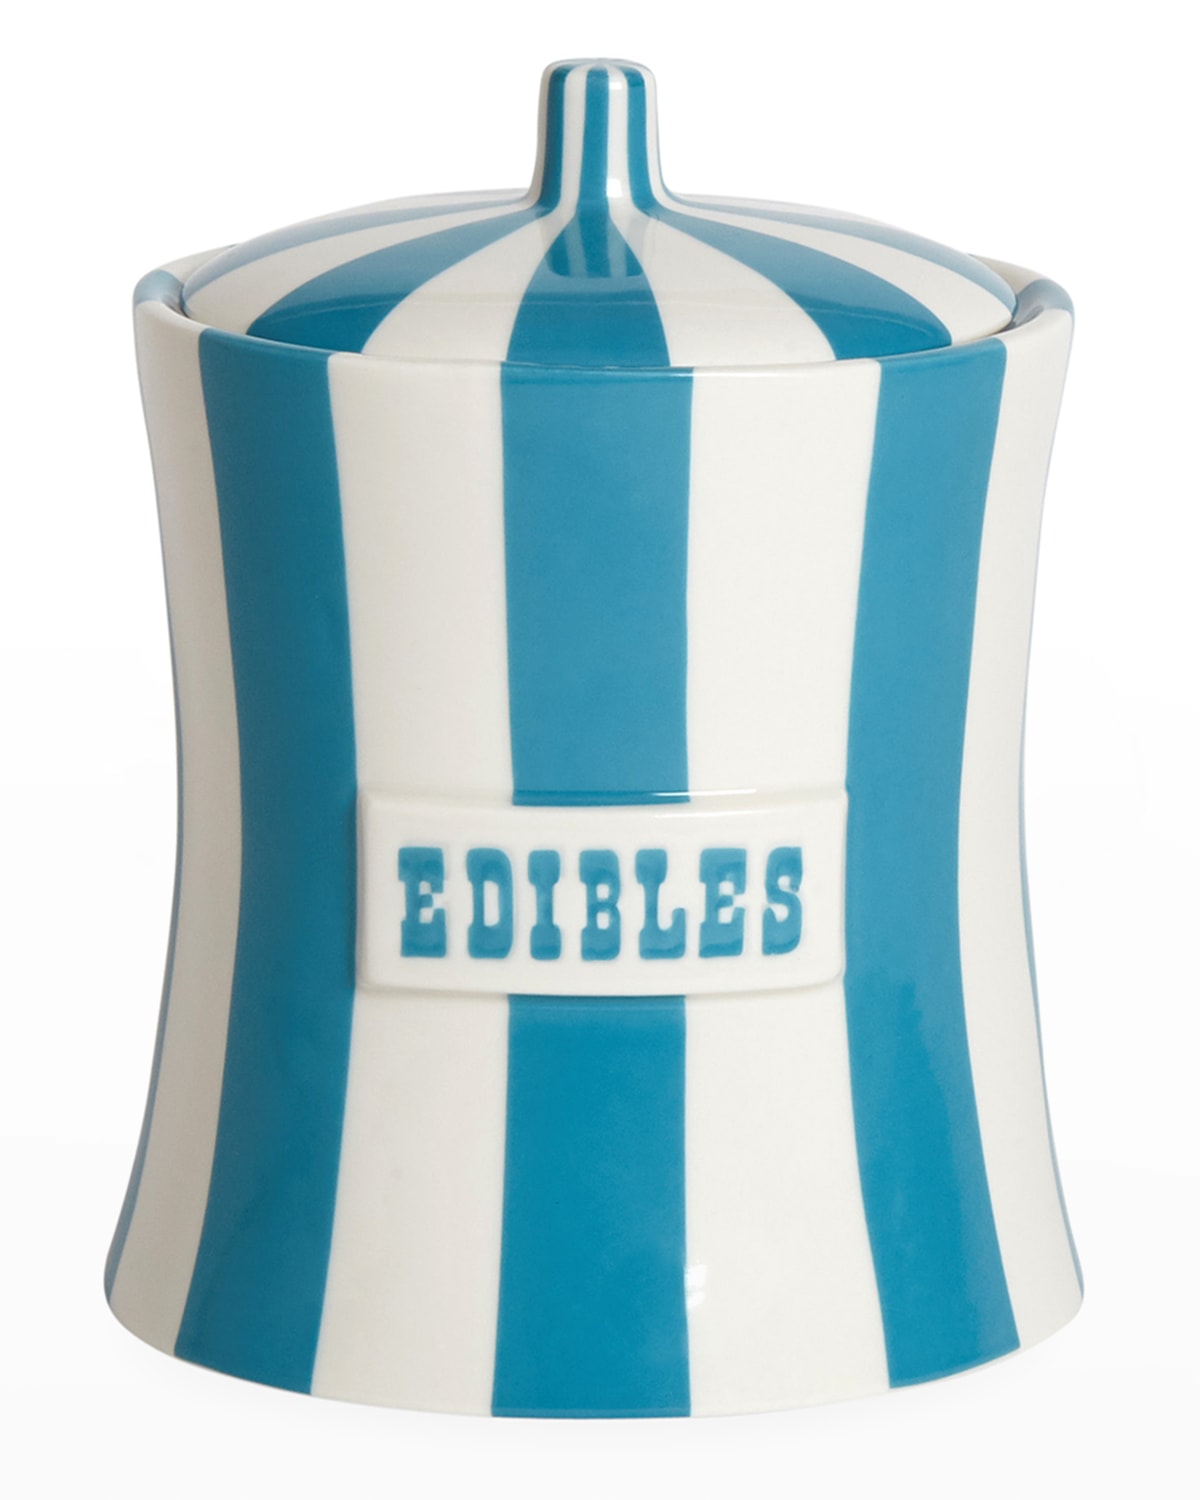 Jonathan Adler Vice Edibles Canister In Teal